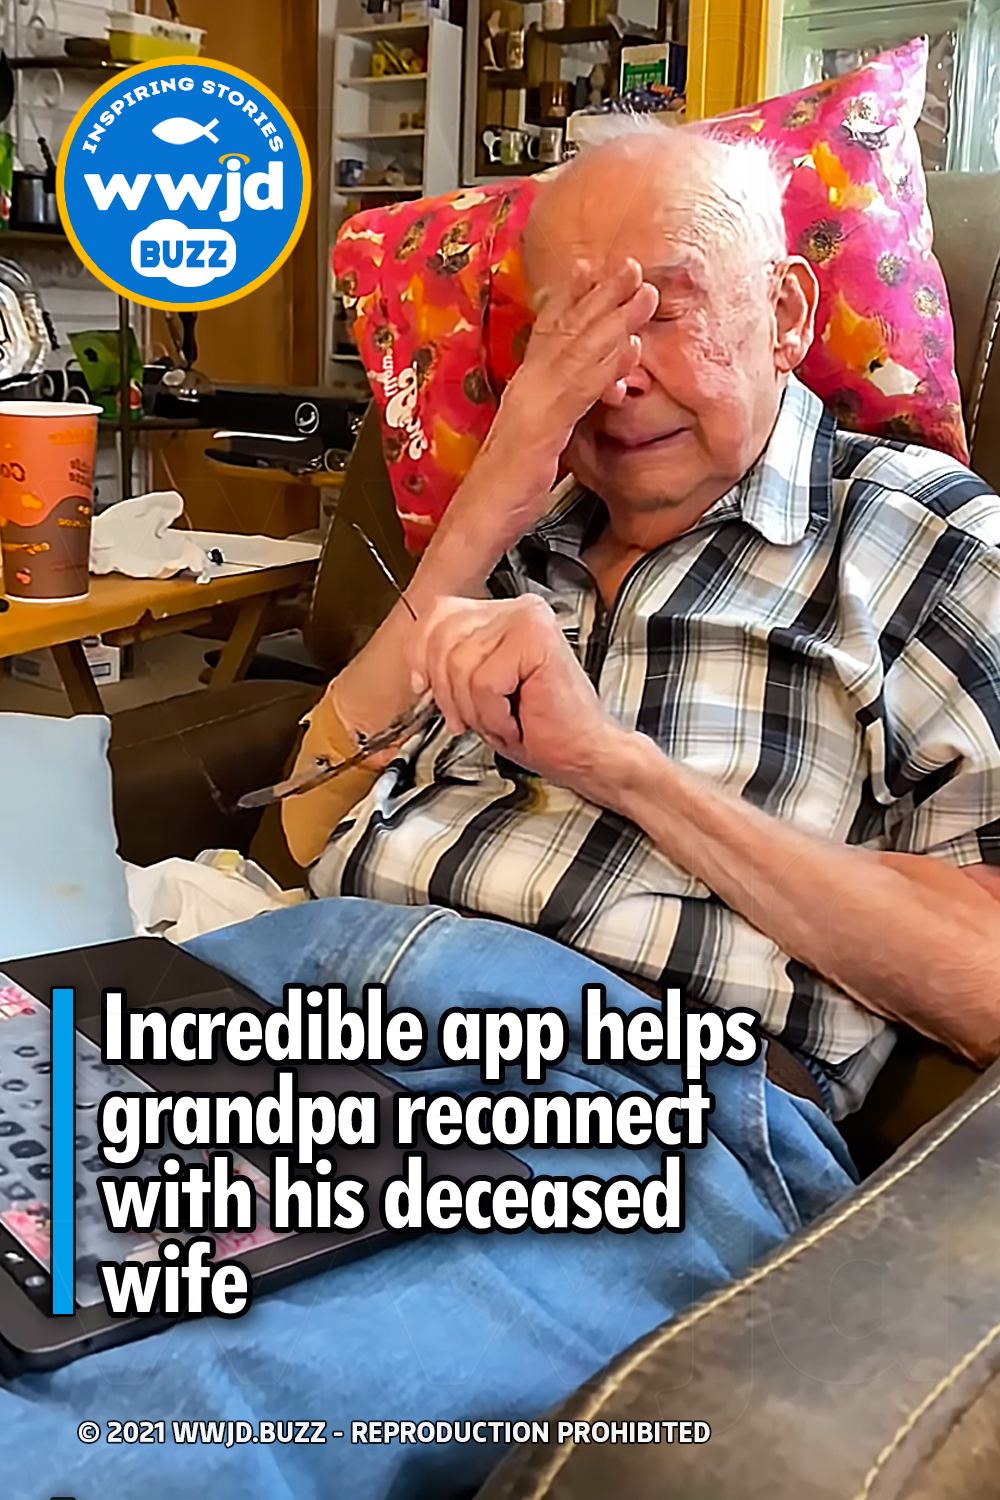 Incredible app helps grandpa reconnect with his deceased wife